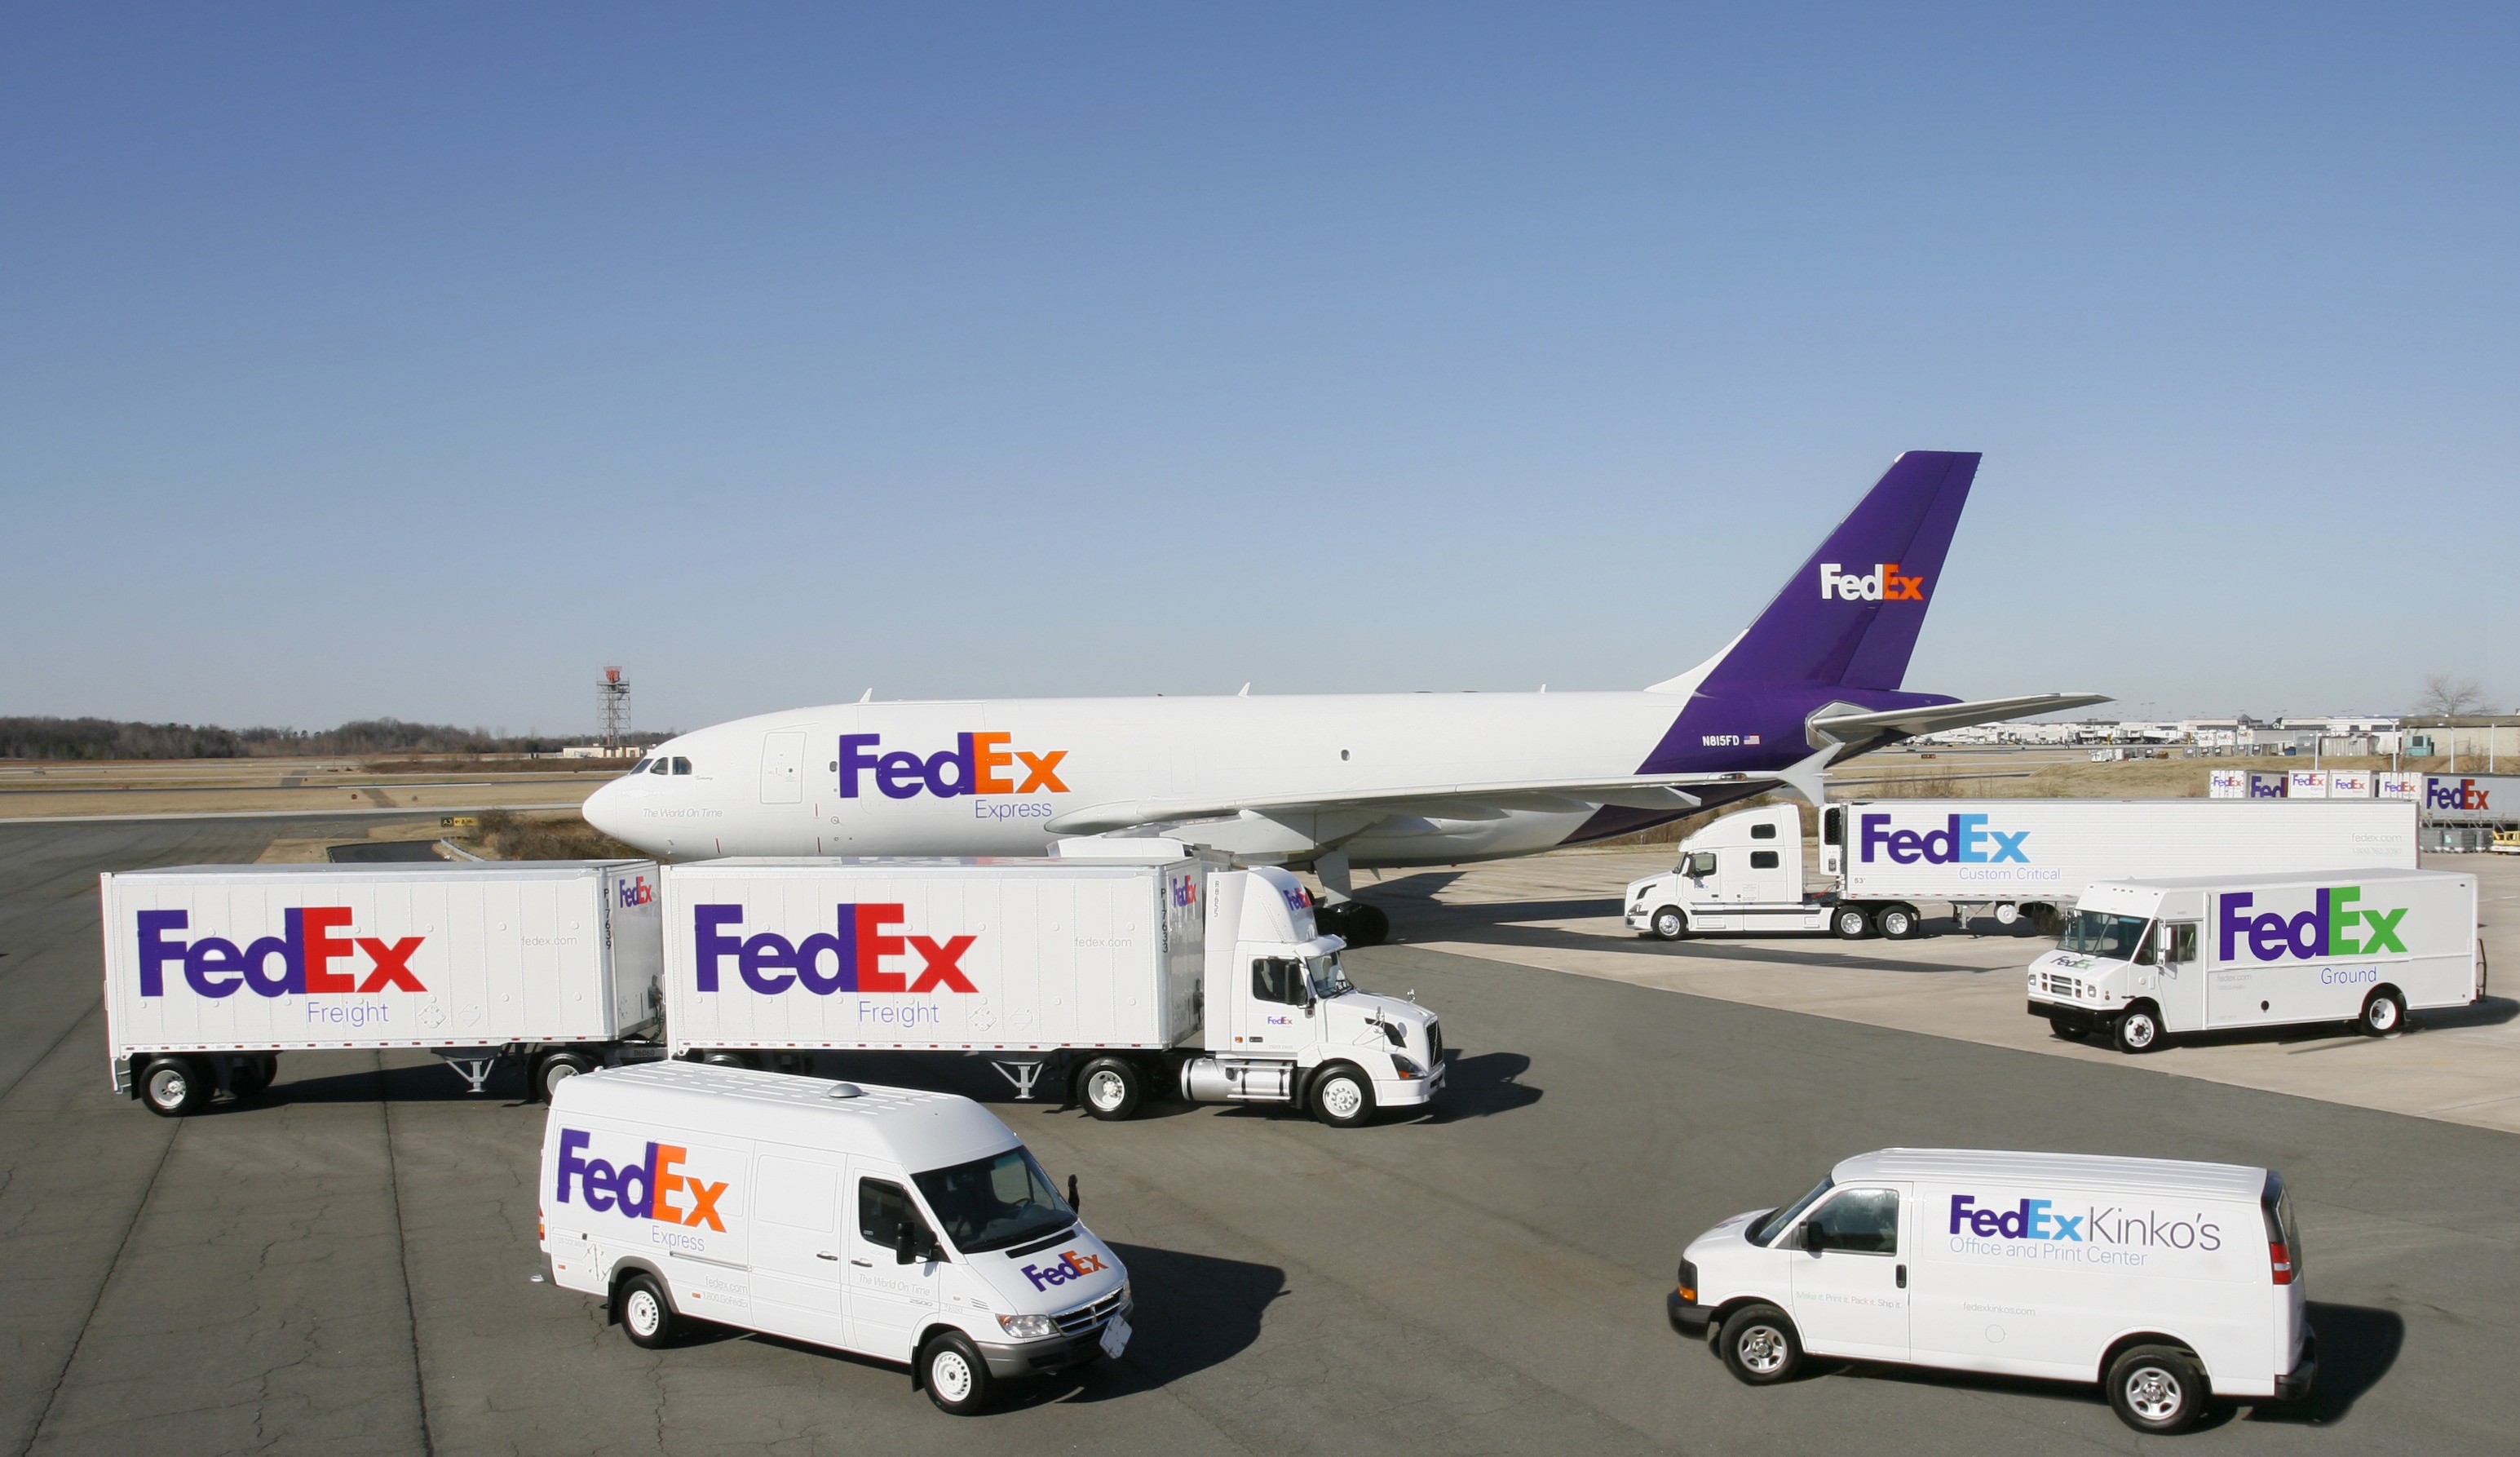 fedex wallpaper,vehicle,airplane,airline,air travel,airliner